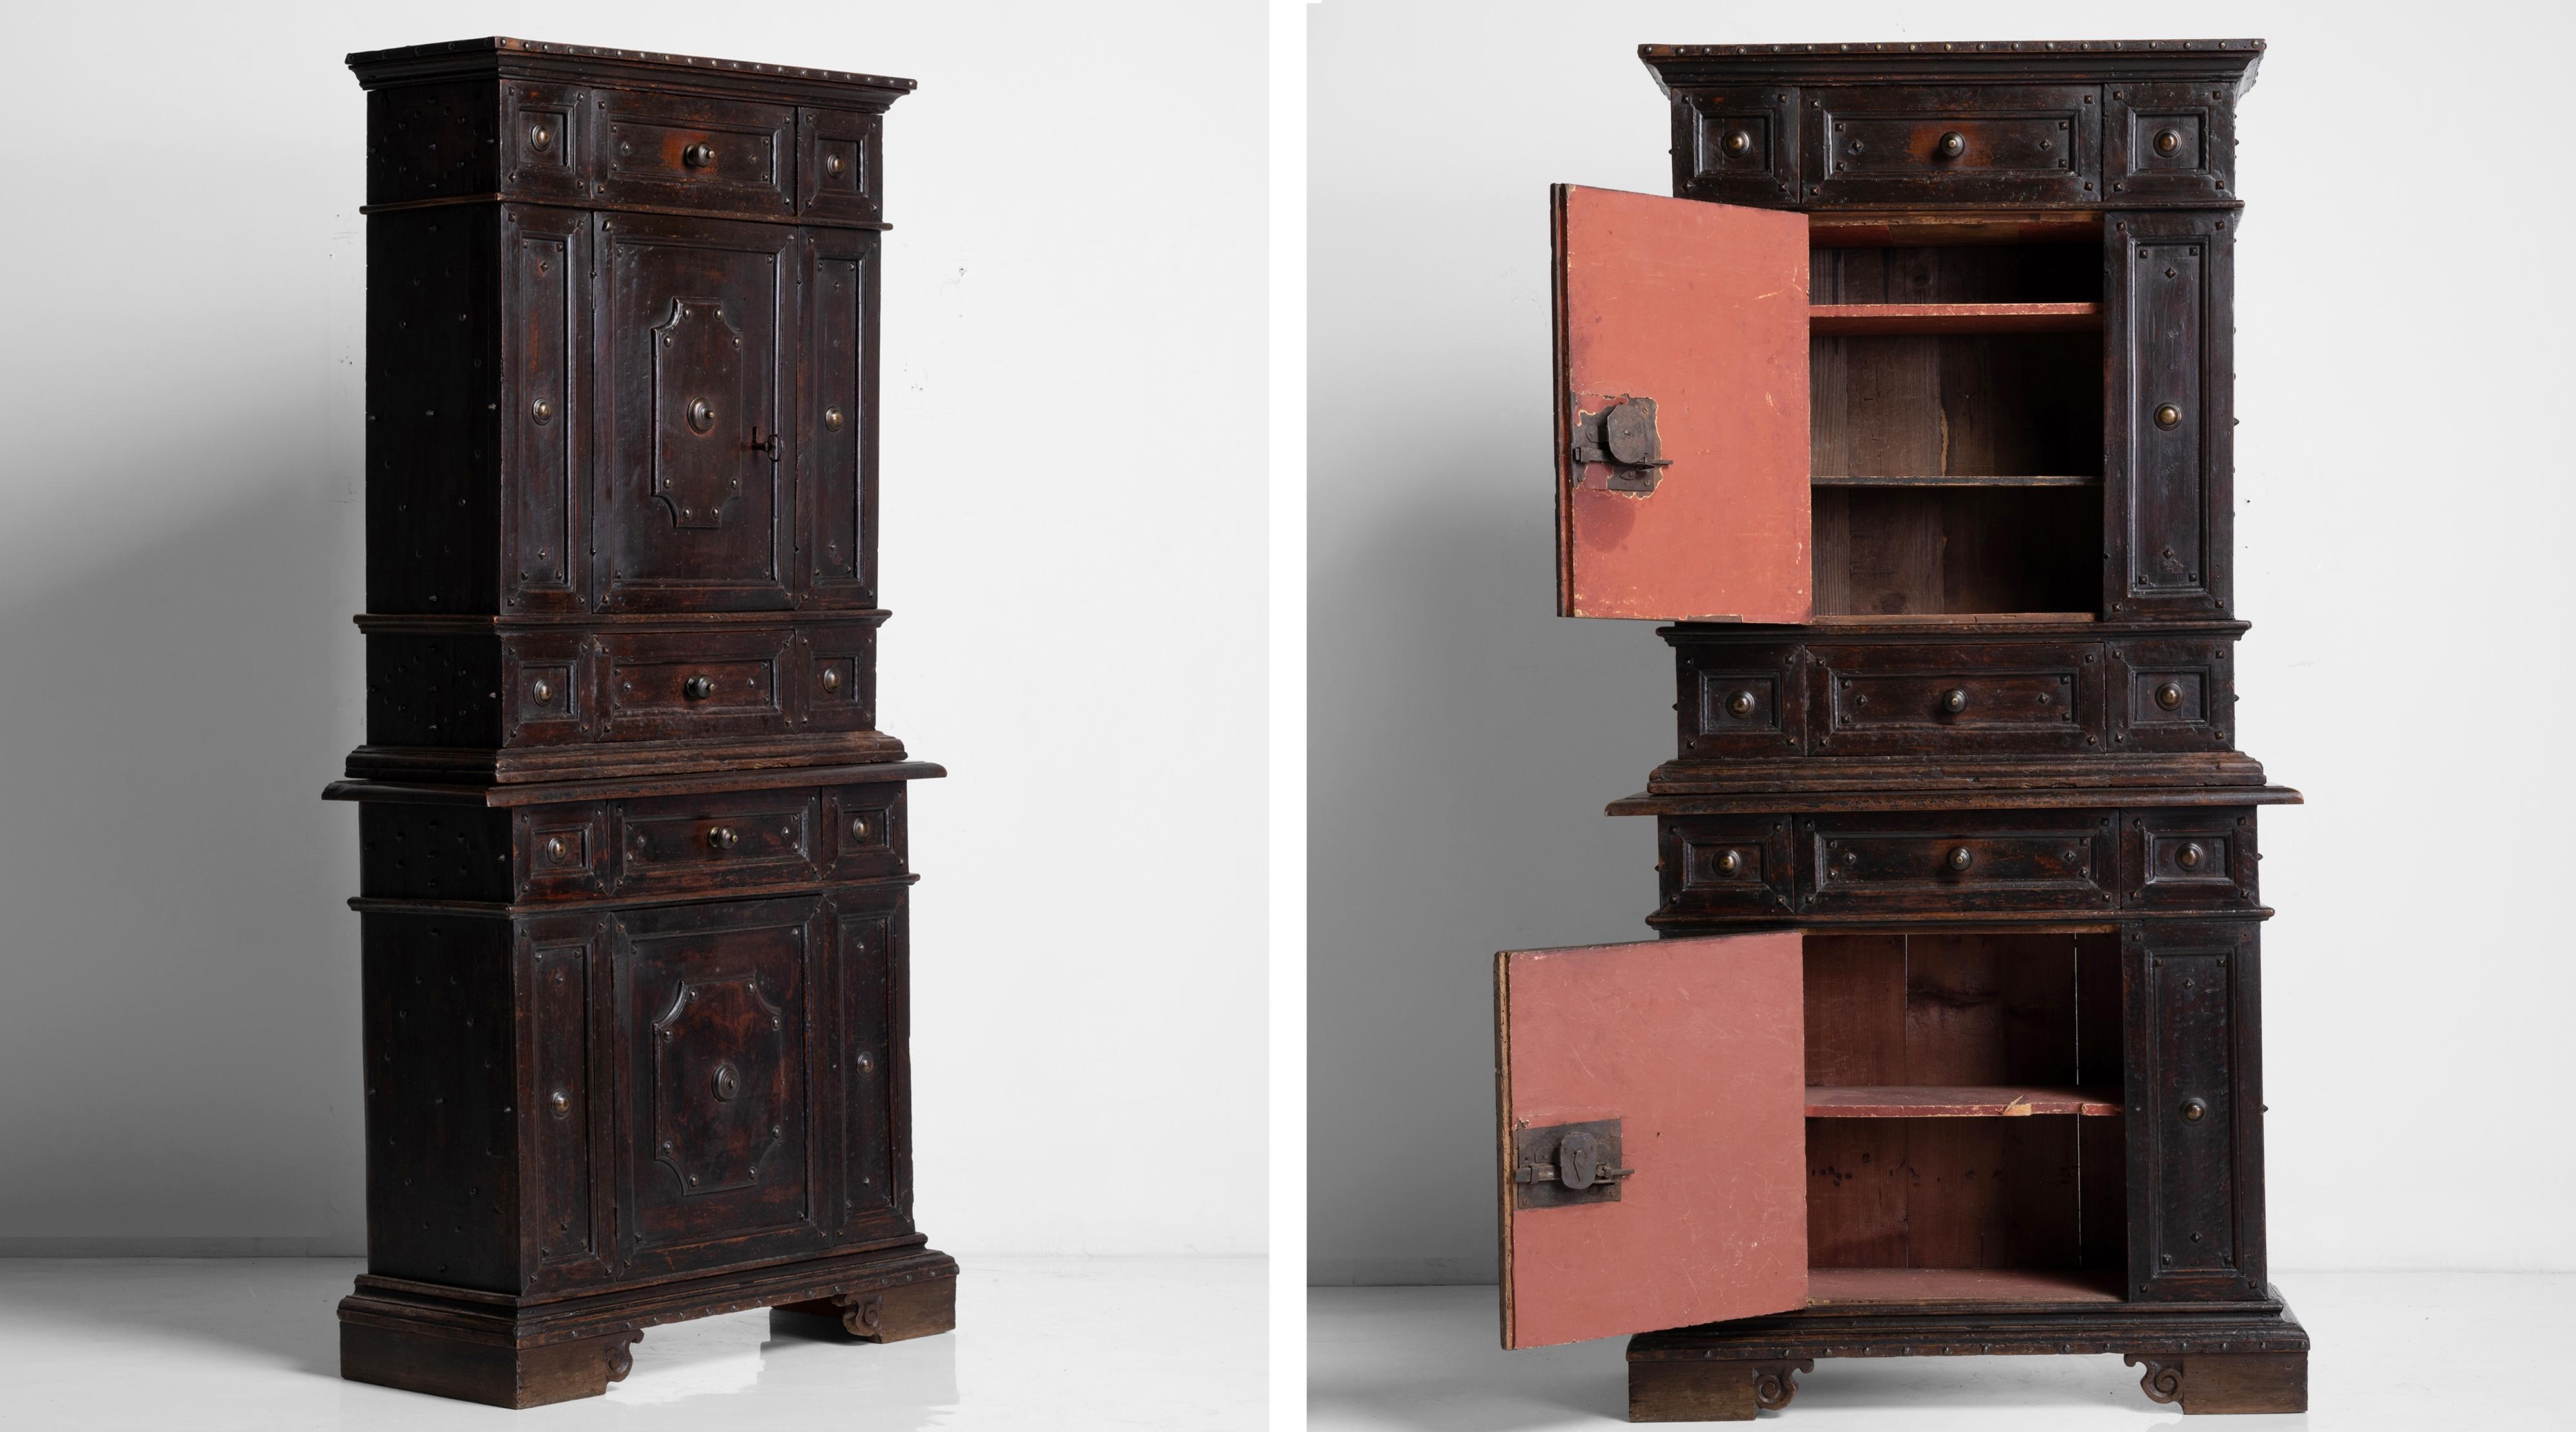 Walnut & iron studded cabinet

Italy Circa 1700

Two door cabinet with drawers for storage. Wrought iron details, turned knobs, and original period finish.

Measures: 34”W x 12.75”d x 66.75”h.